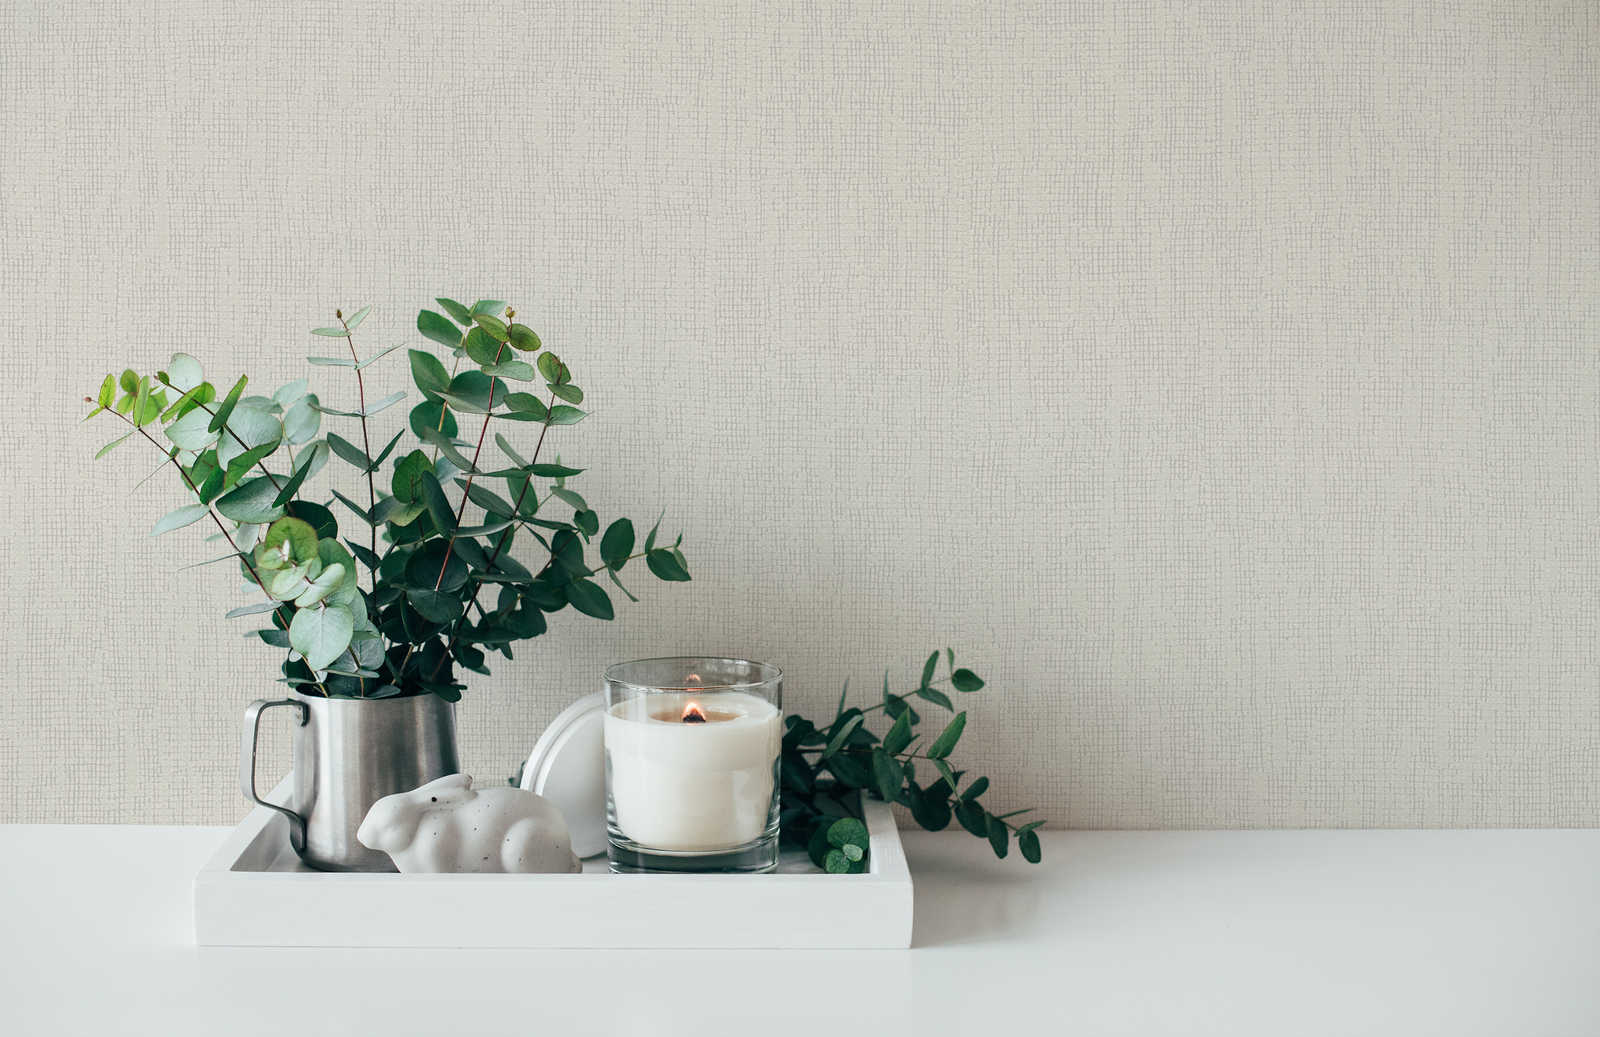             Wallpaper plain with structure details in Scandi style - cream
        